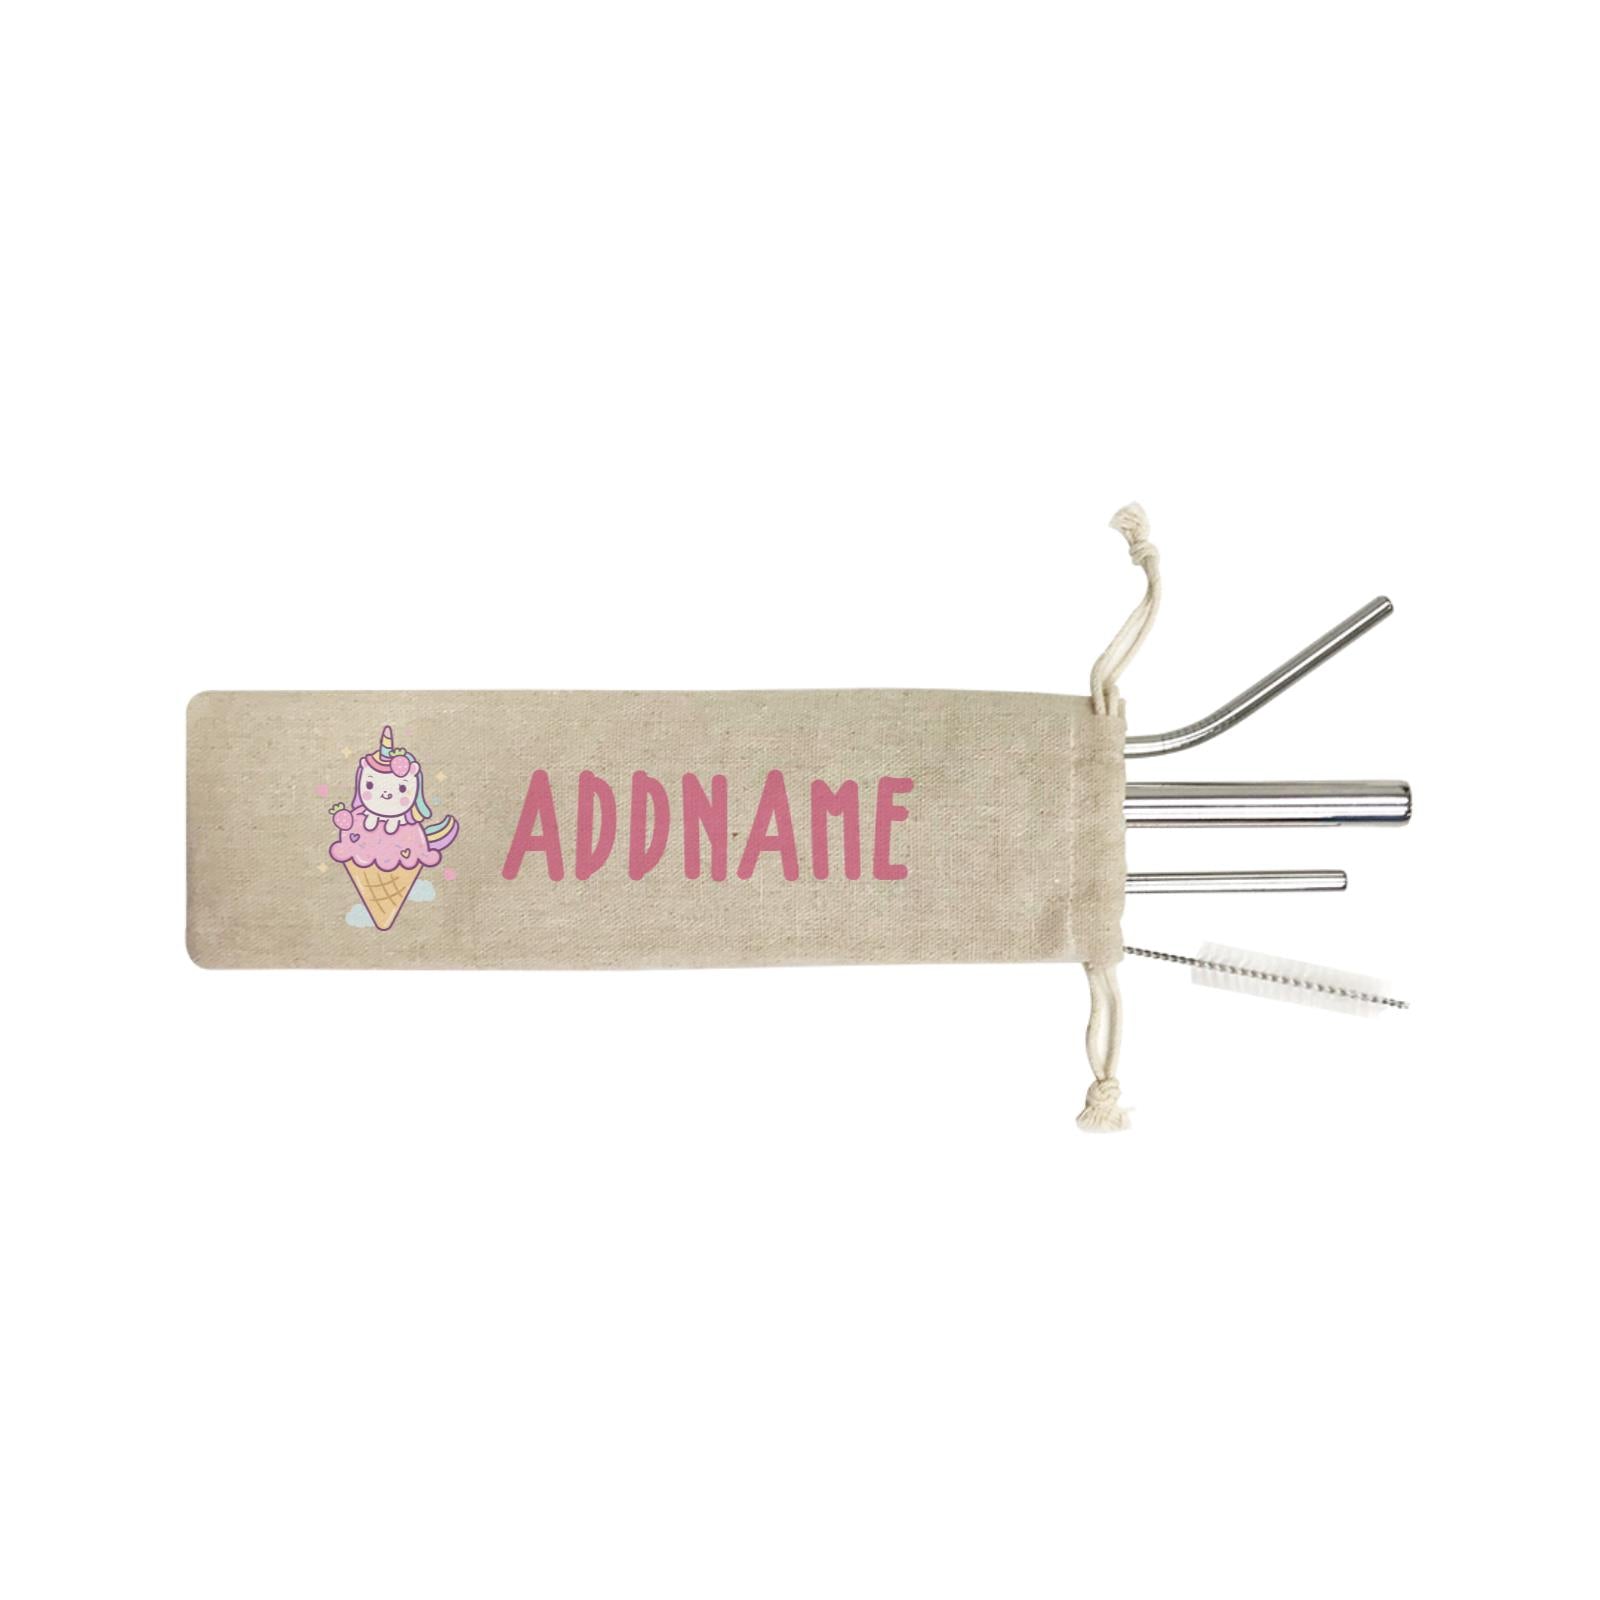 Unicorn And Princess Series Unicorn Hugging Ice Cream Addname SB 4-In-1 Stainless Steel Straw Set in Satchel